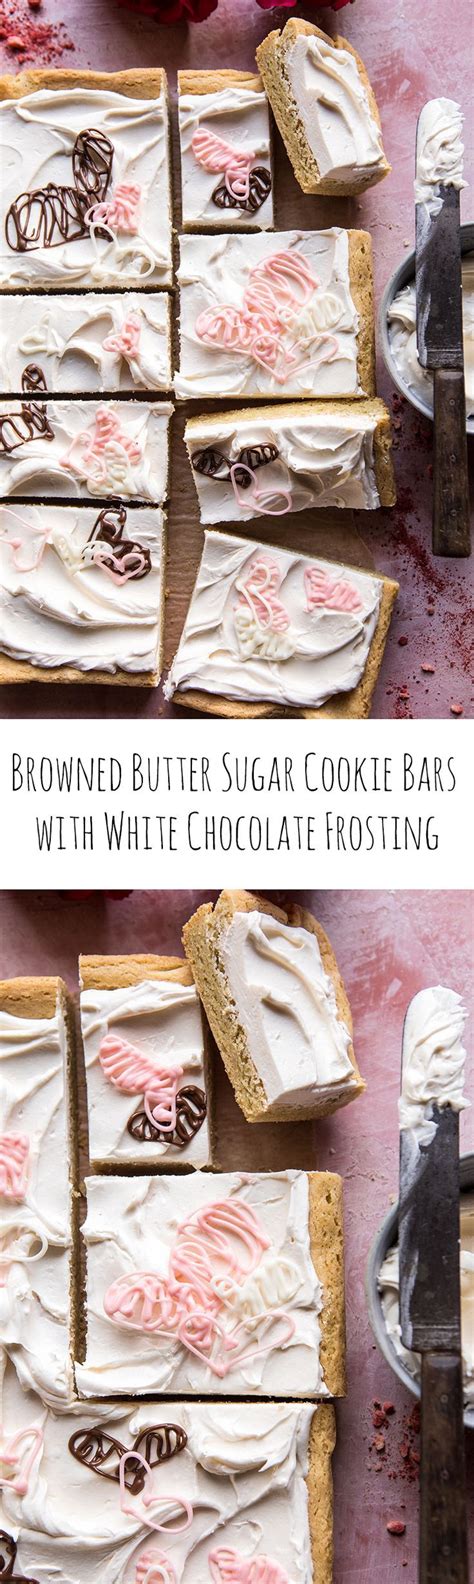 Browned Butter Sugar Cookie Bars With White Chocolate Frosting